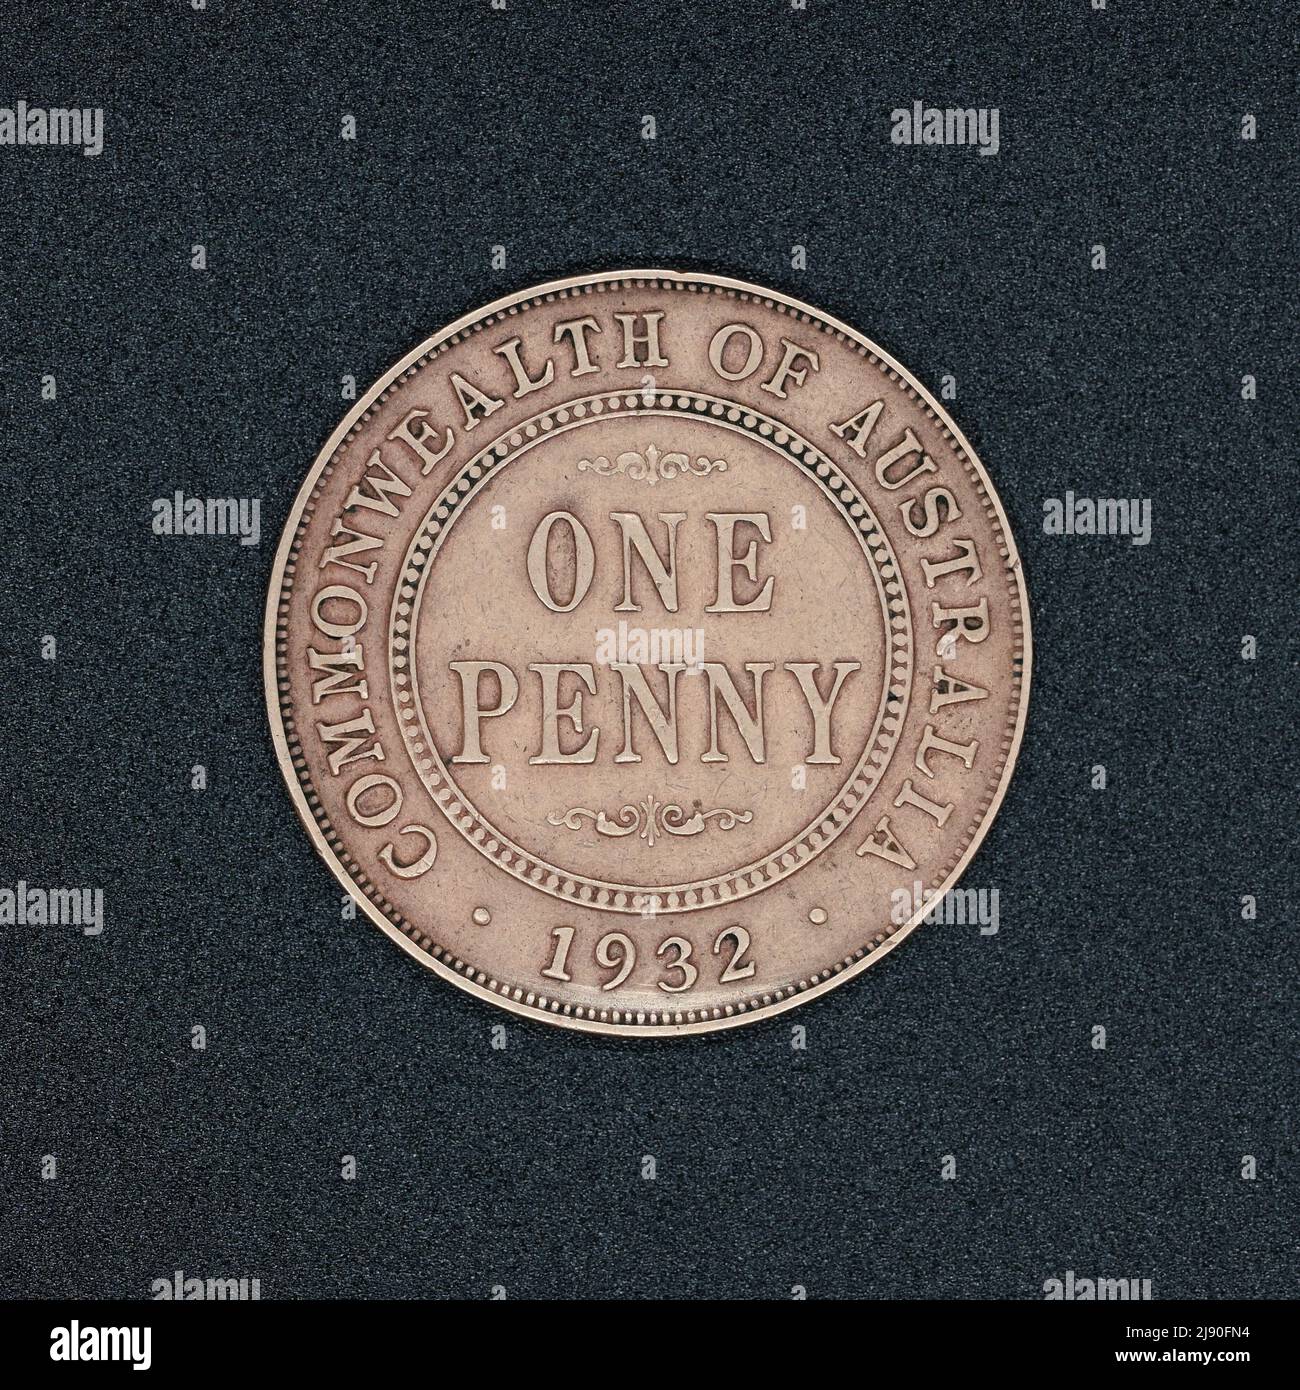 Reverse side of an Australian one penny coin coin from 1932, made of bronze, on a black surface Stock Photo